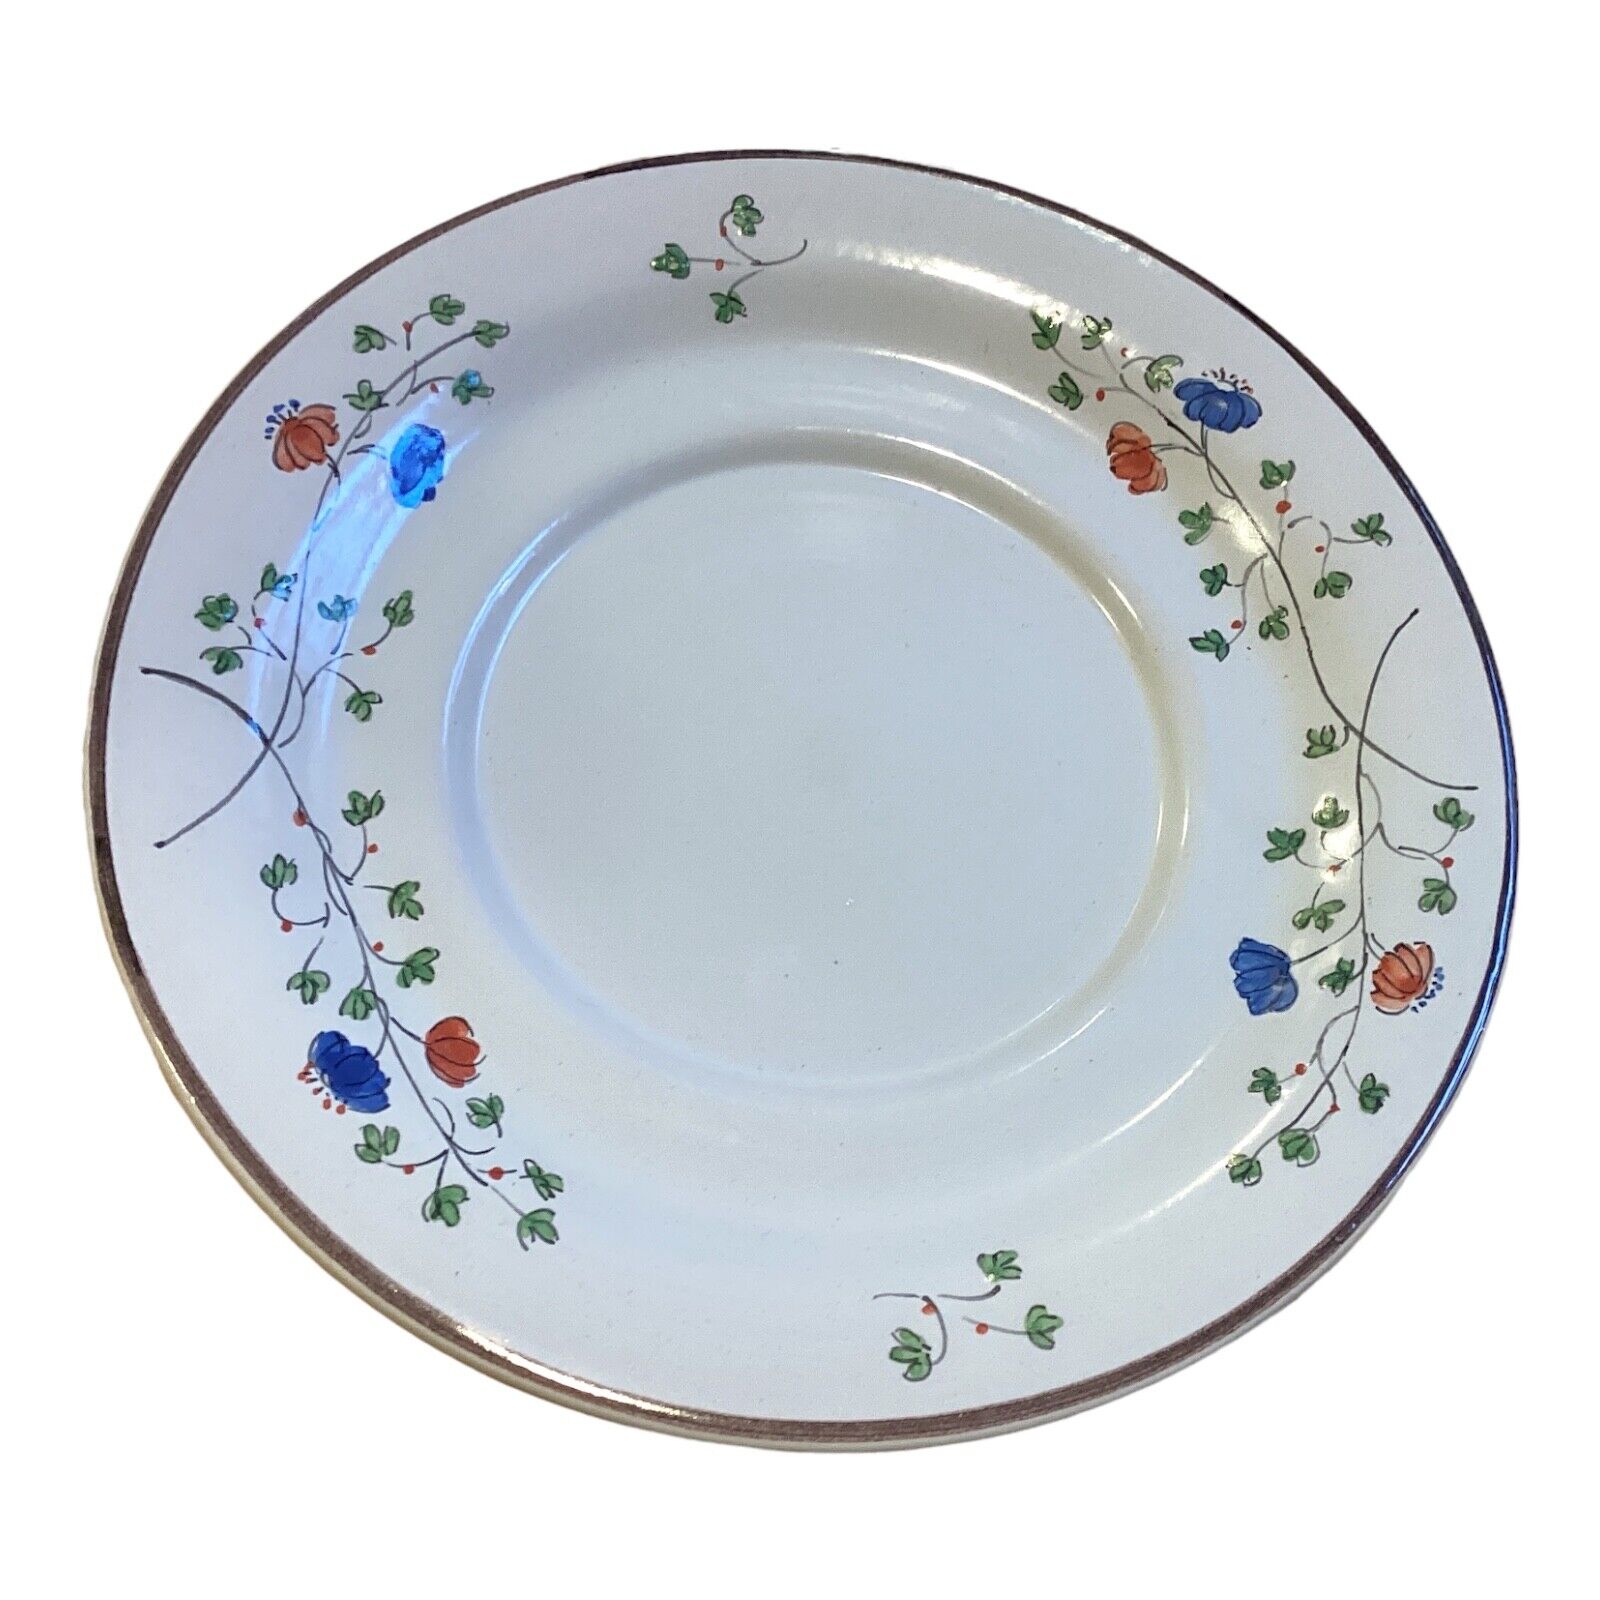 Faiencerie d'Art de Malicorne, French Provence Pottery - White Side Plate